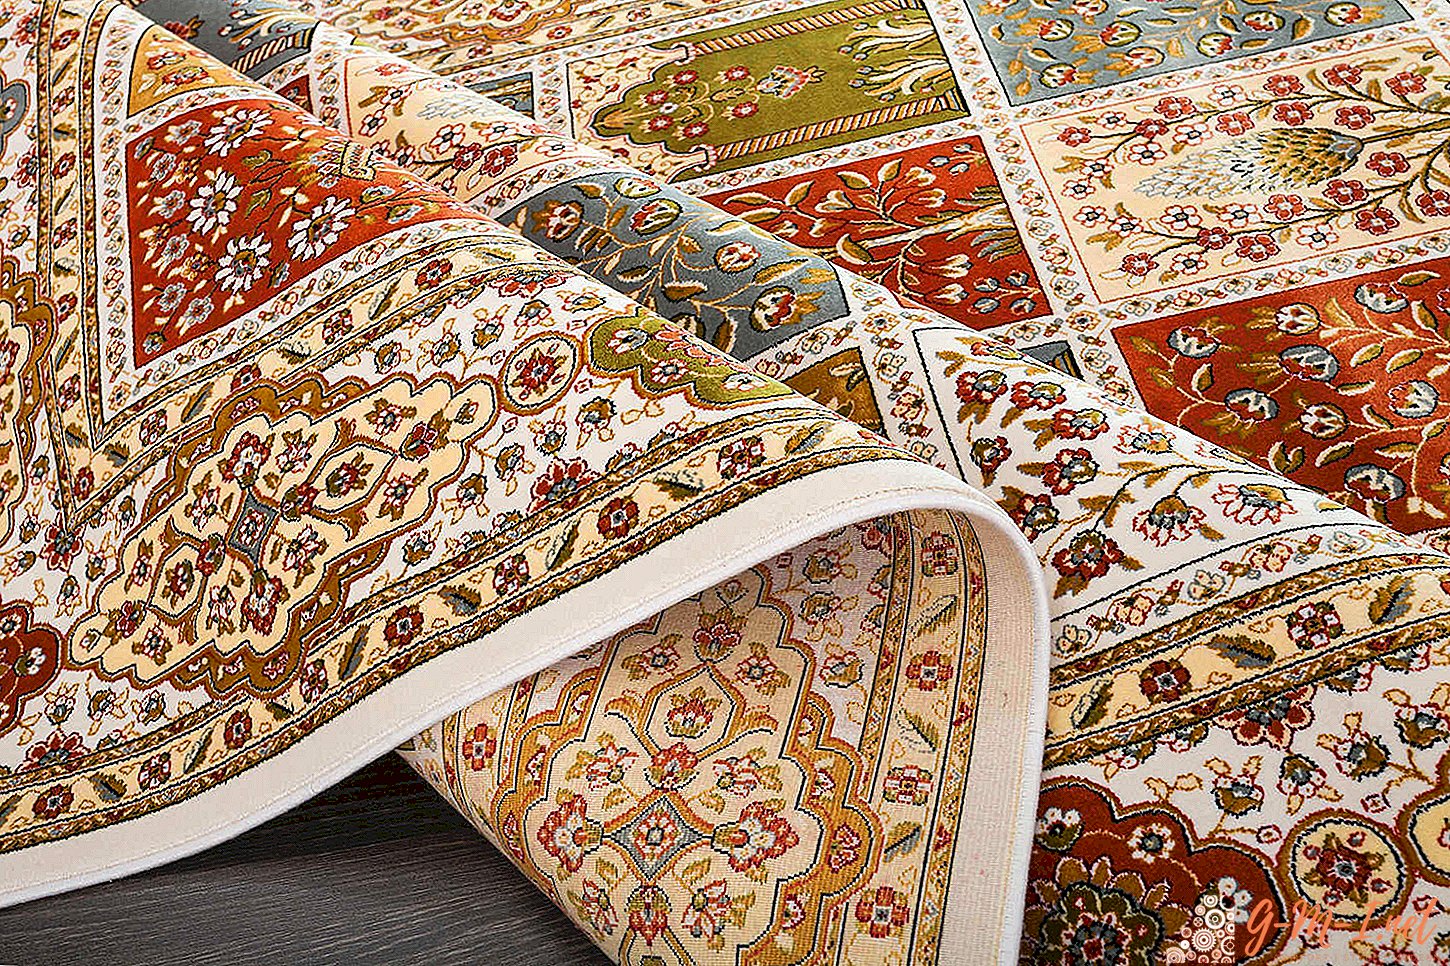 What carpets are made of